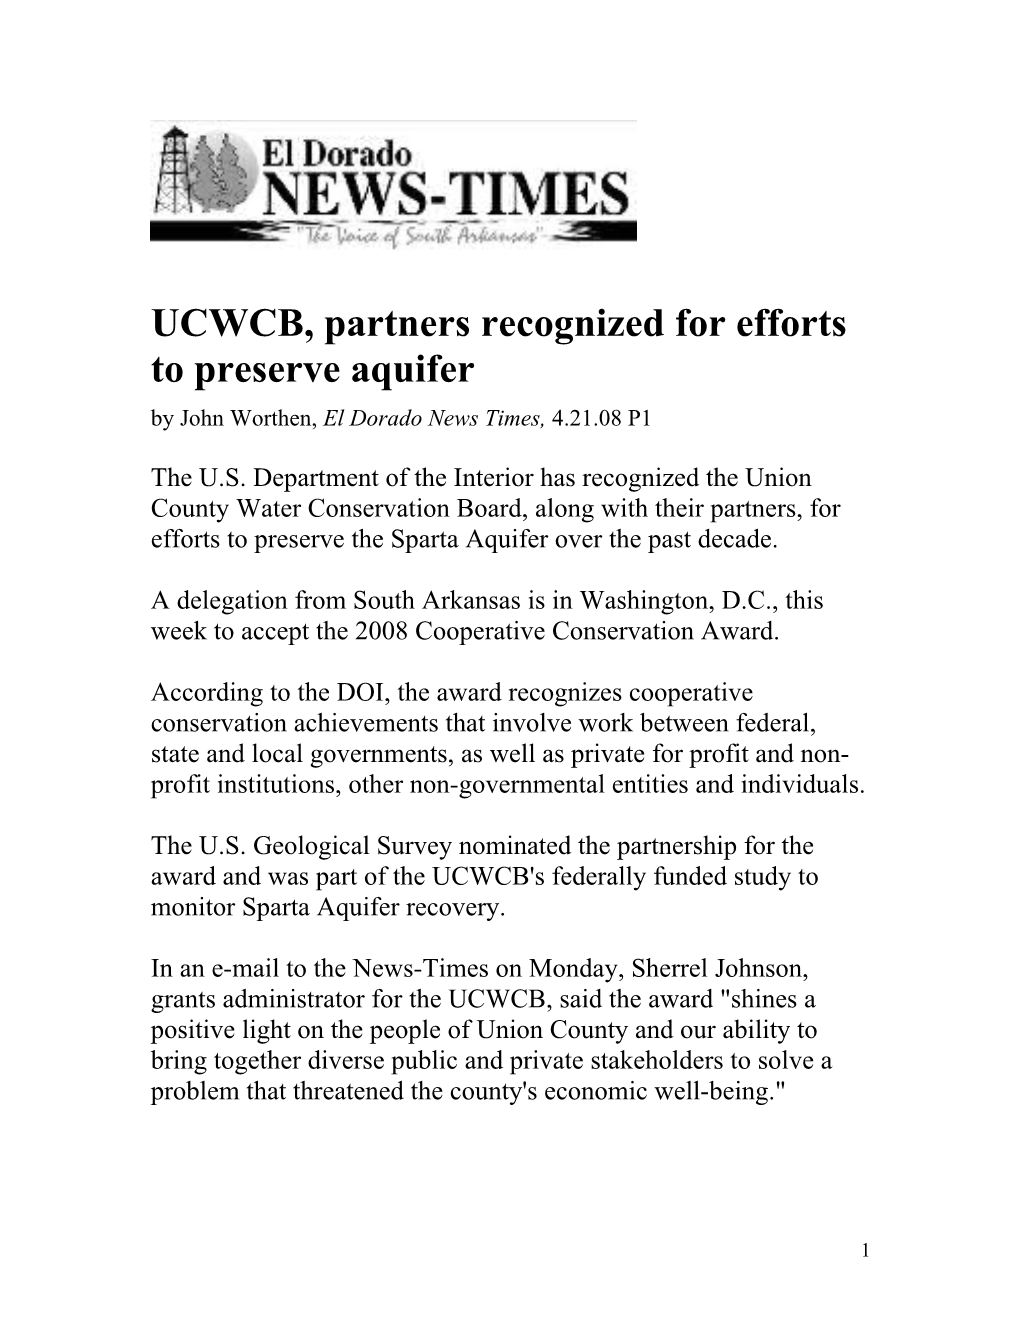 UCWCB, Partners Recognized for Efforts to Preserve Aquifer